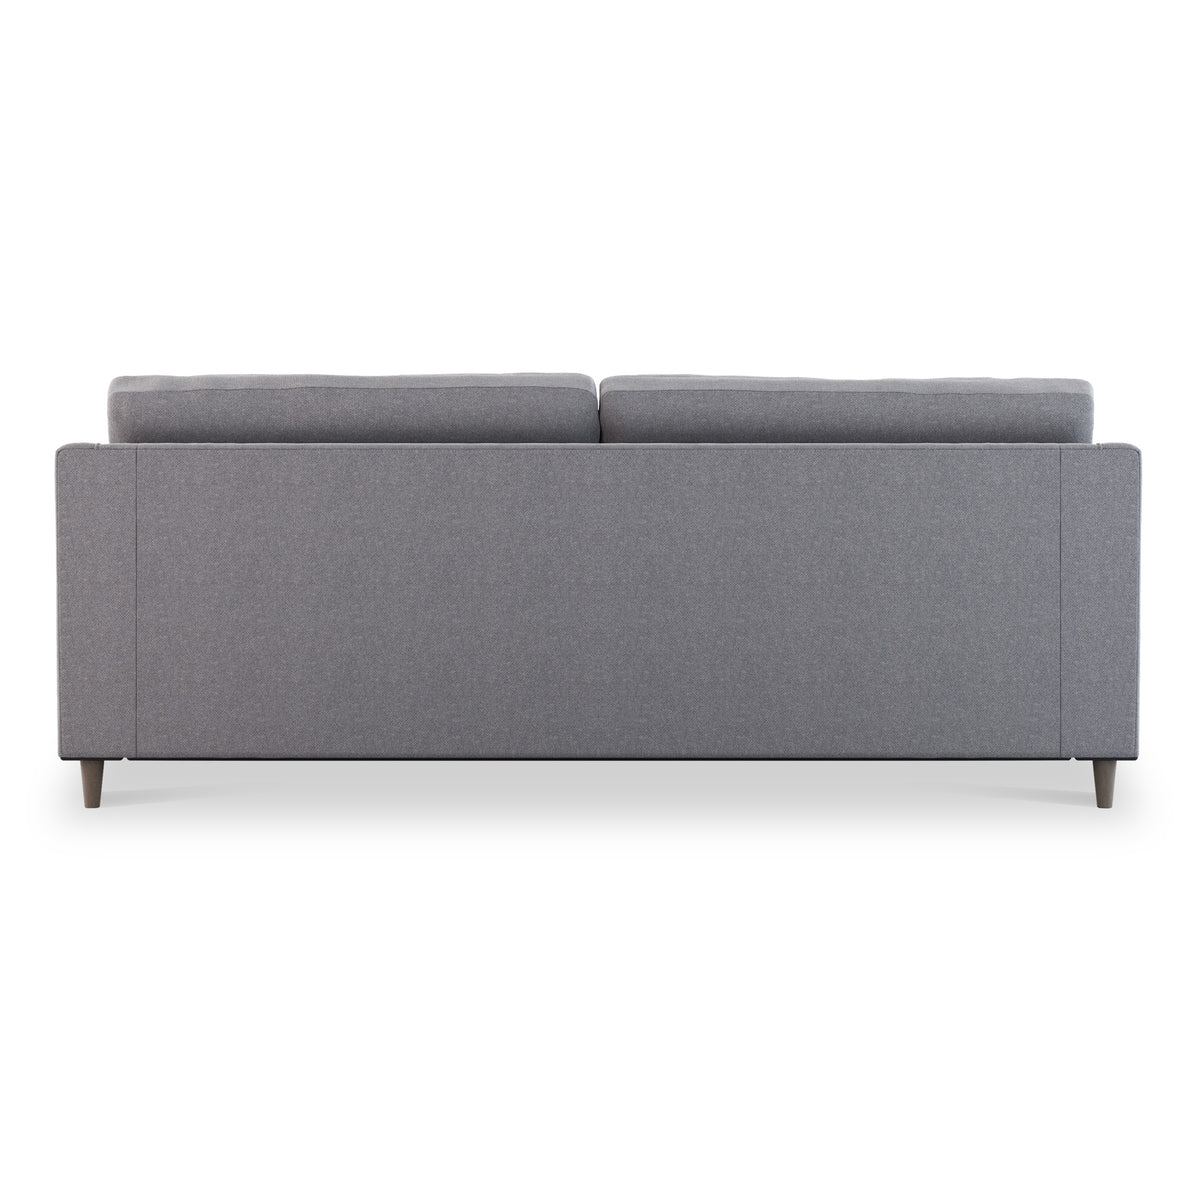 Justin Silver 4 Seater Sofa from Roseland Furniture